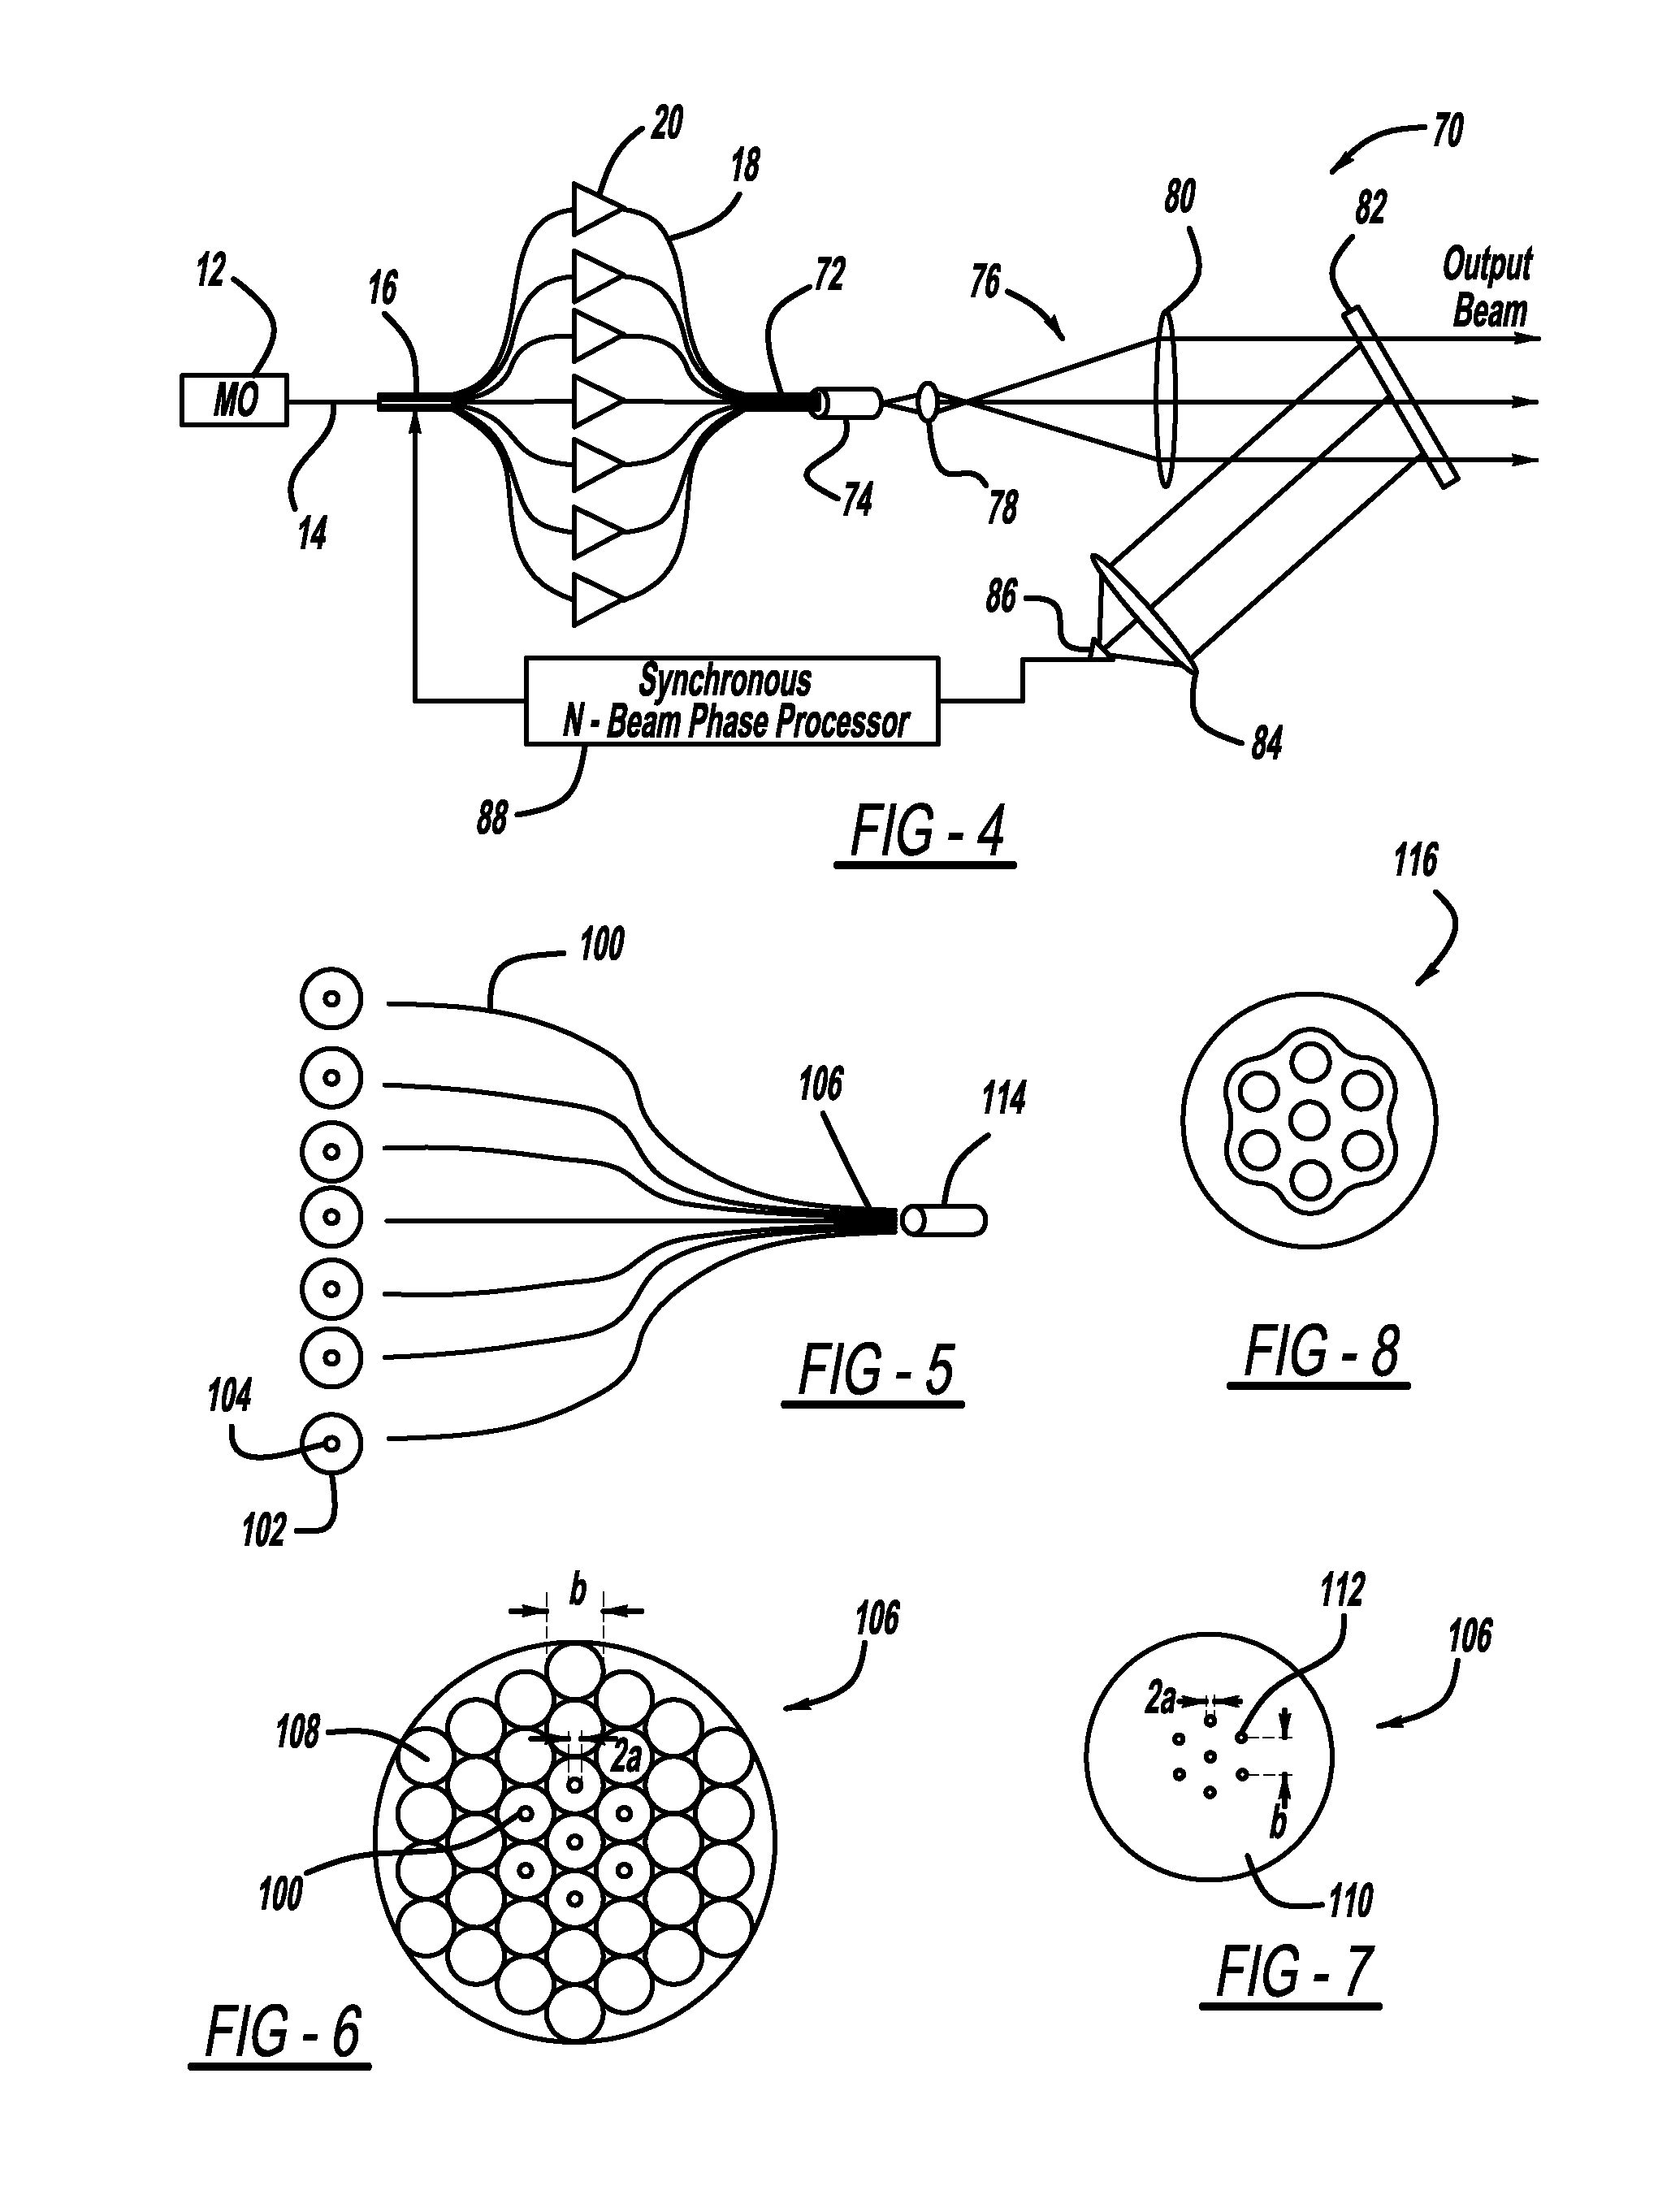 Multi-channel fiber laser amplifier combining apparatus including integrated spectral beam combination and a tapered fiber bundle having multiple fiber outputs